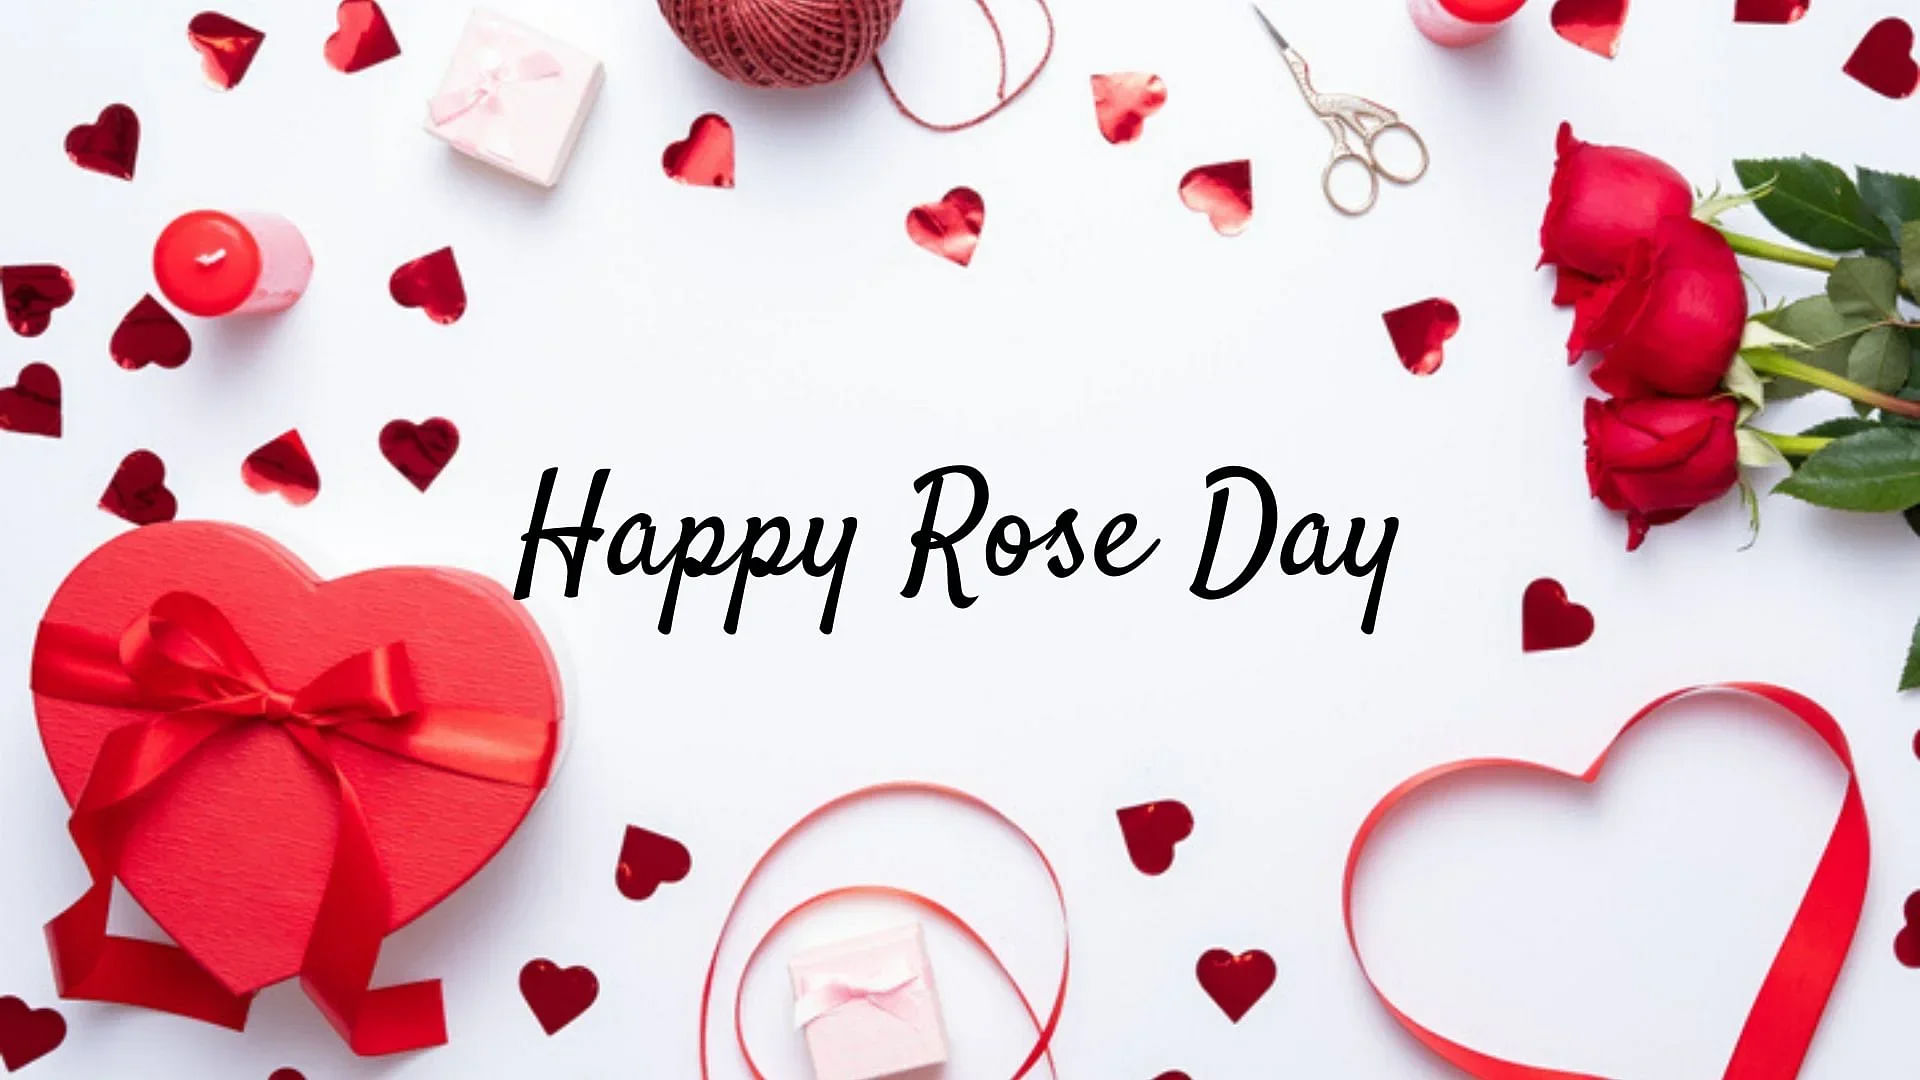 Happy Rose Day 2021 Quotes in English and Hindi. Rose Day Images and Wishes  to Send on Facebook, Instagram and WhatsApp